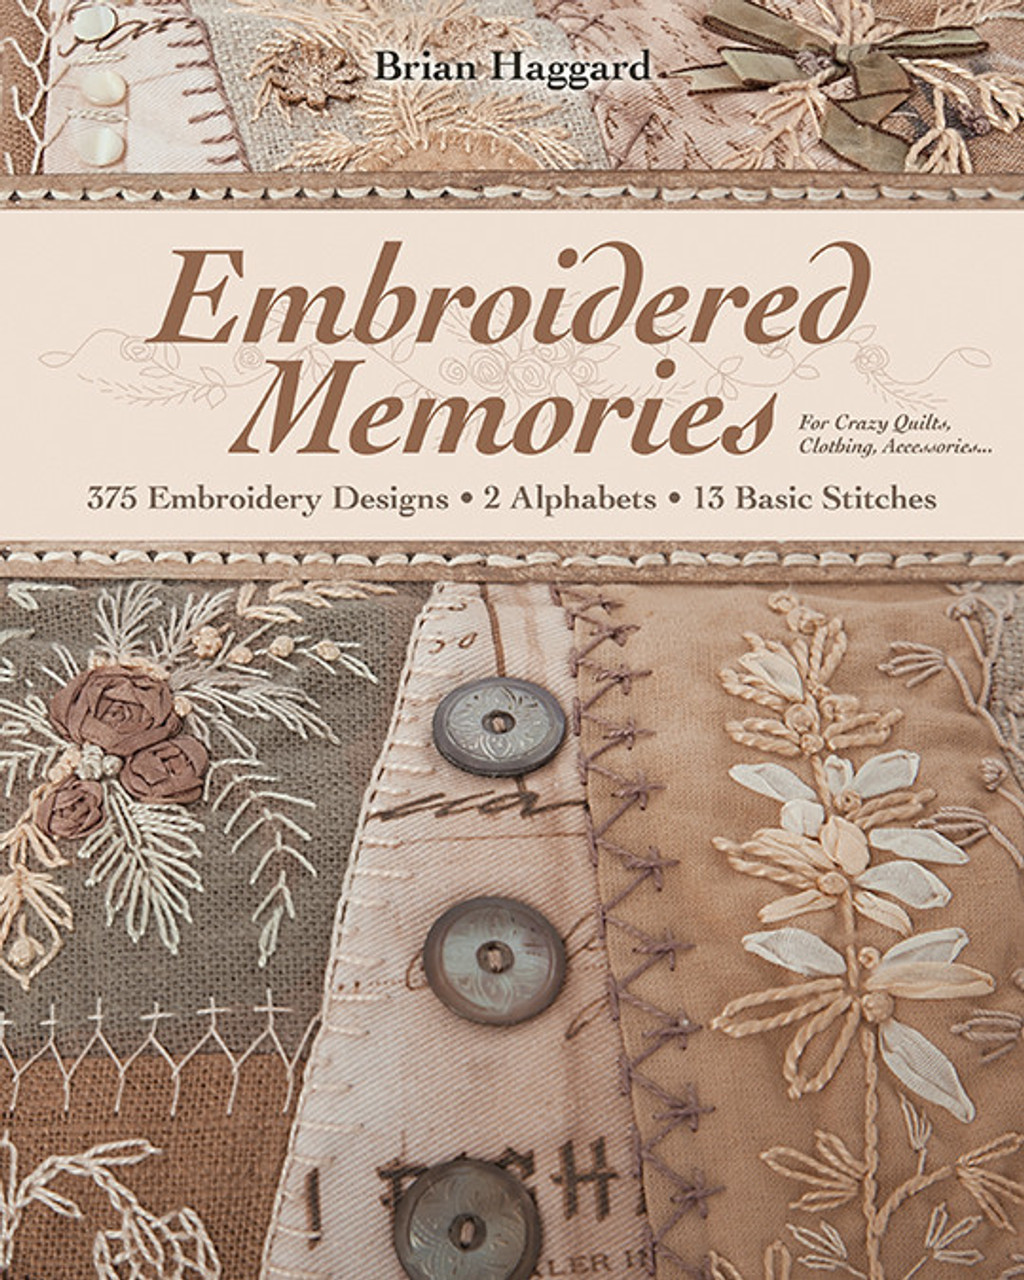 Embroidery Supplies, 2 Popular Patterns Printed Embroidery For